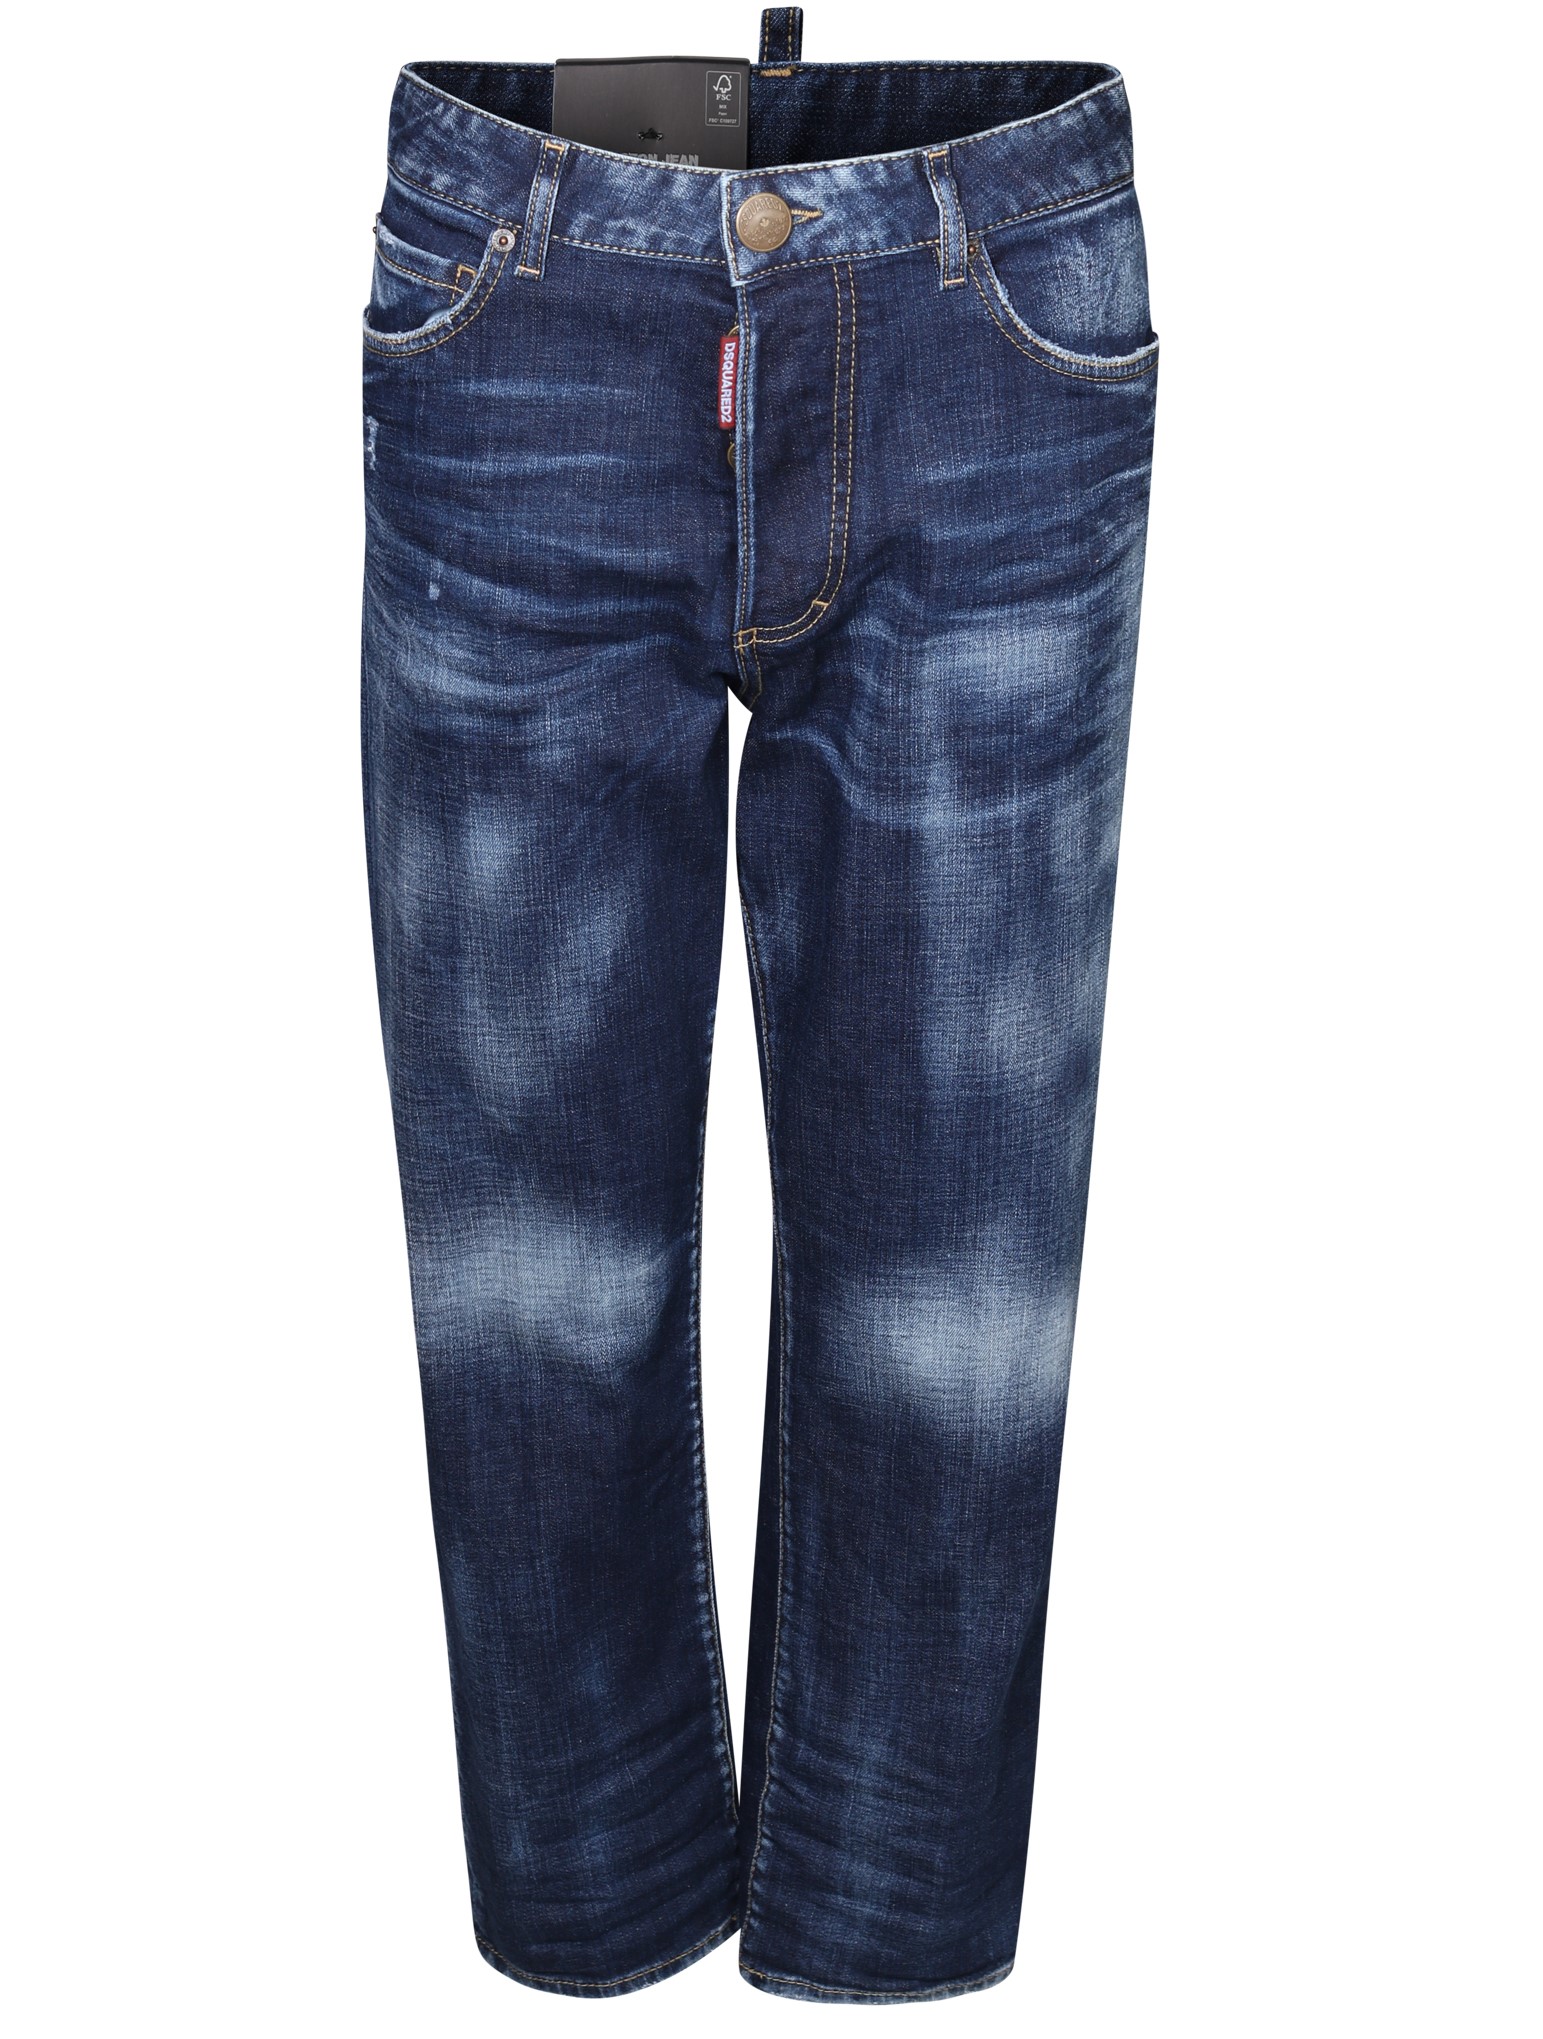 DSQUARED2 Boston Jeans in Washed Dark Blue